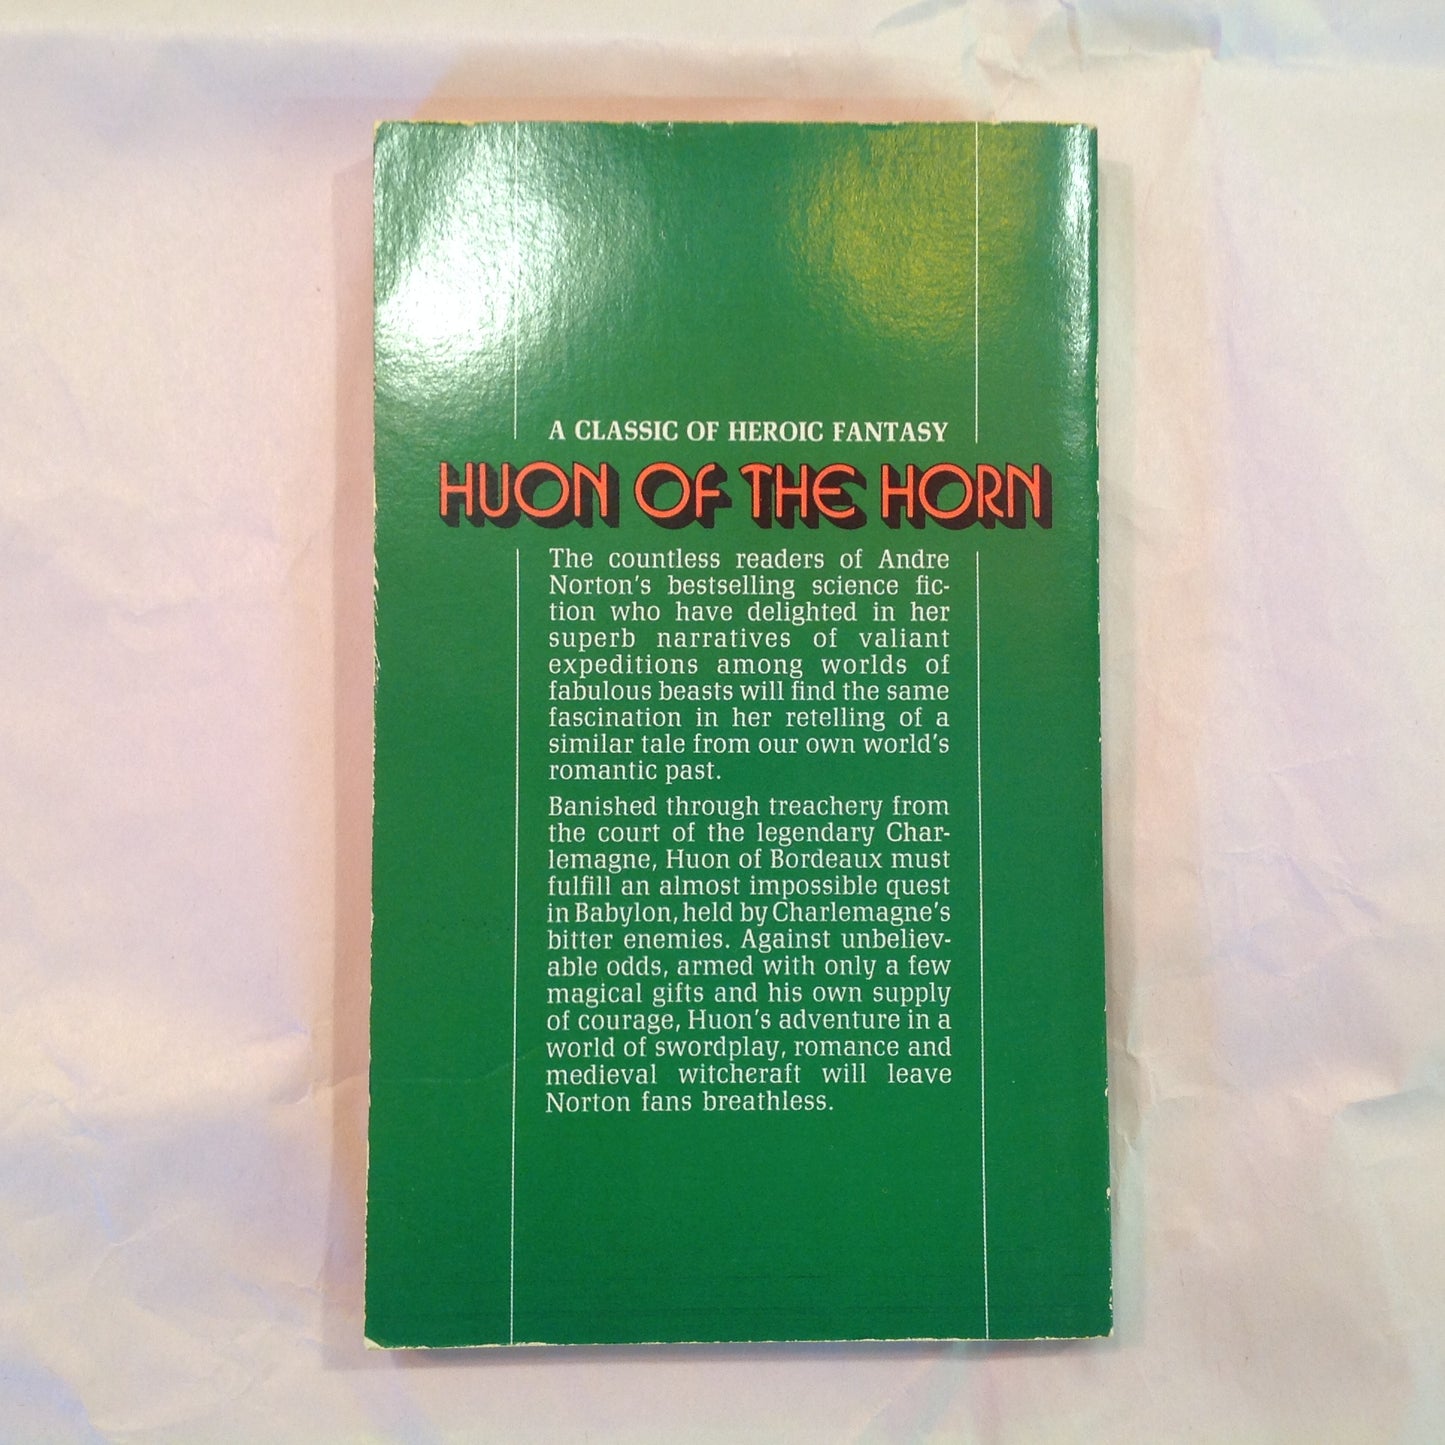 Vintage 1973 Mass Market Paperback Huon of the Horn Andre Norton